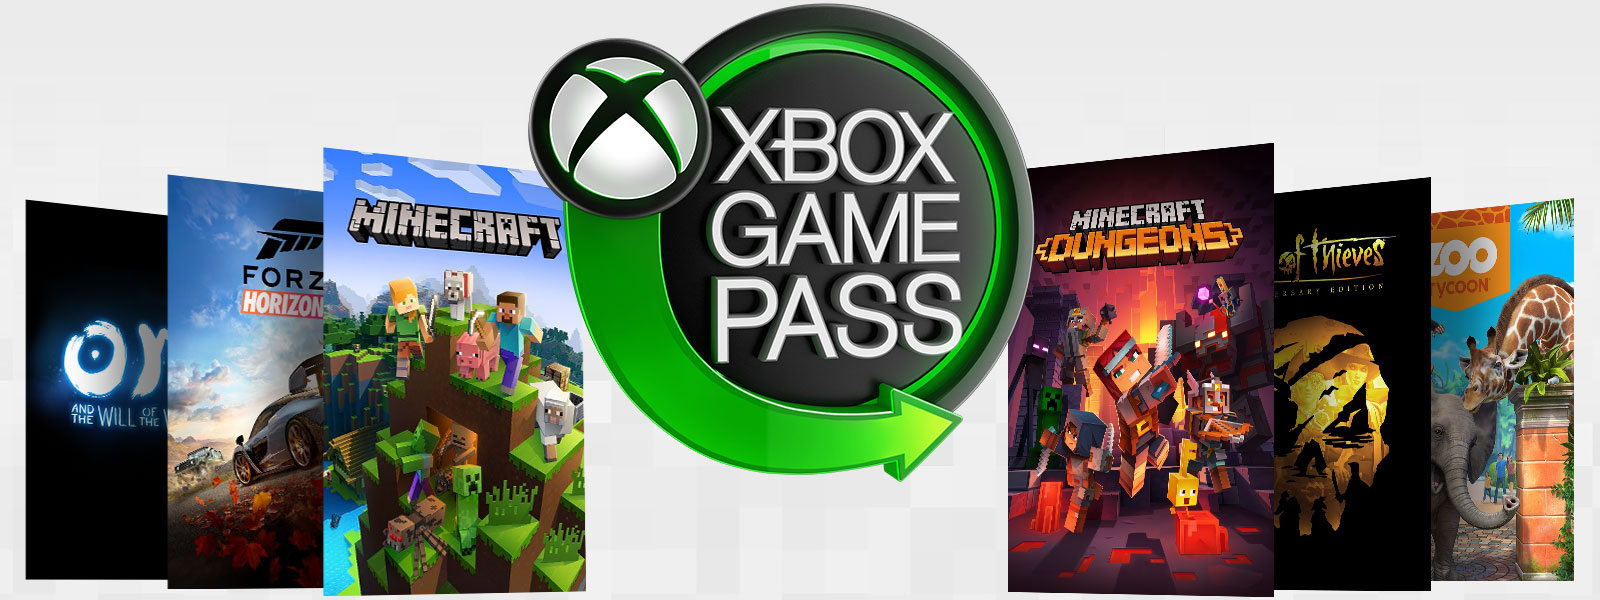 xbox game pass minecraft pc download